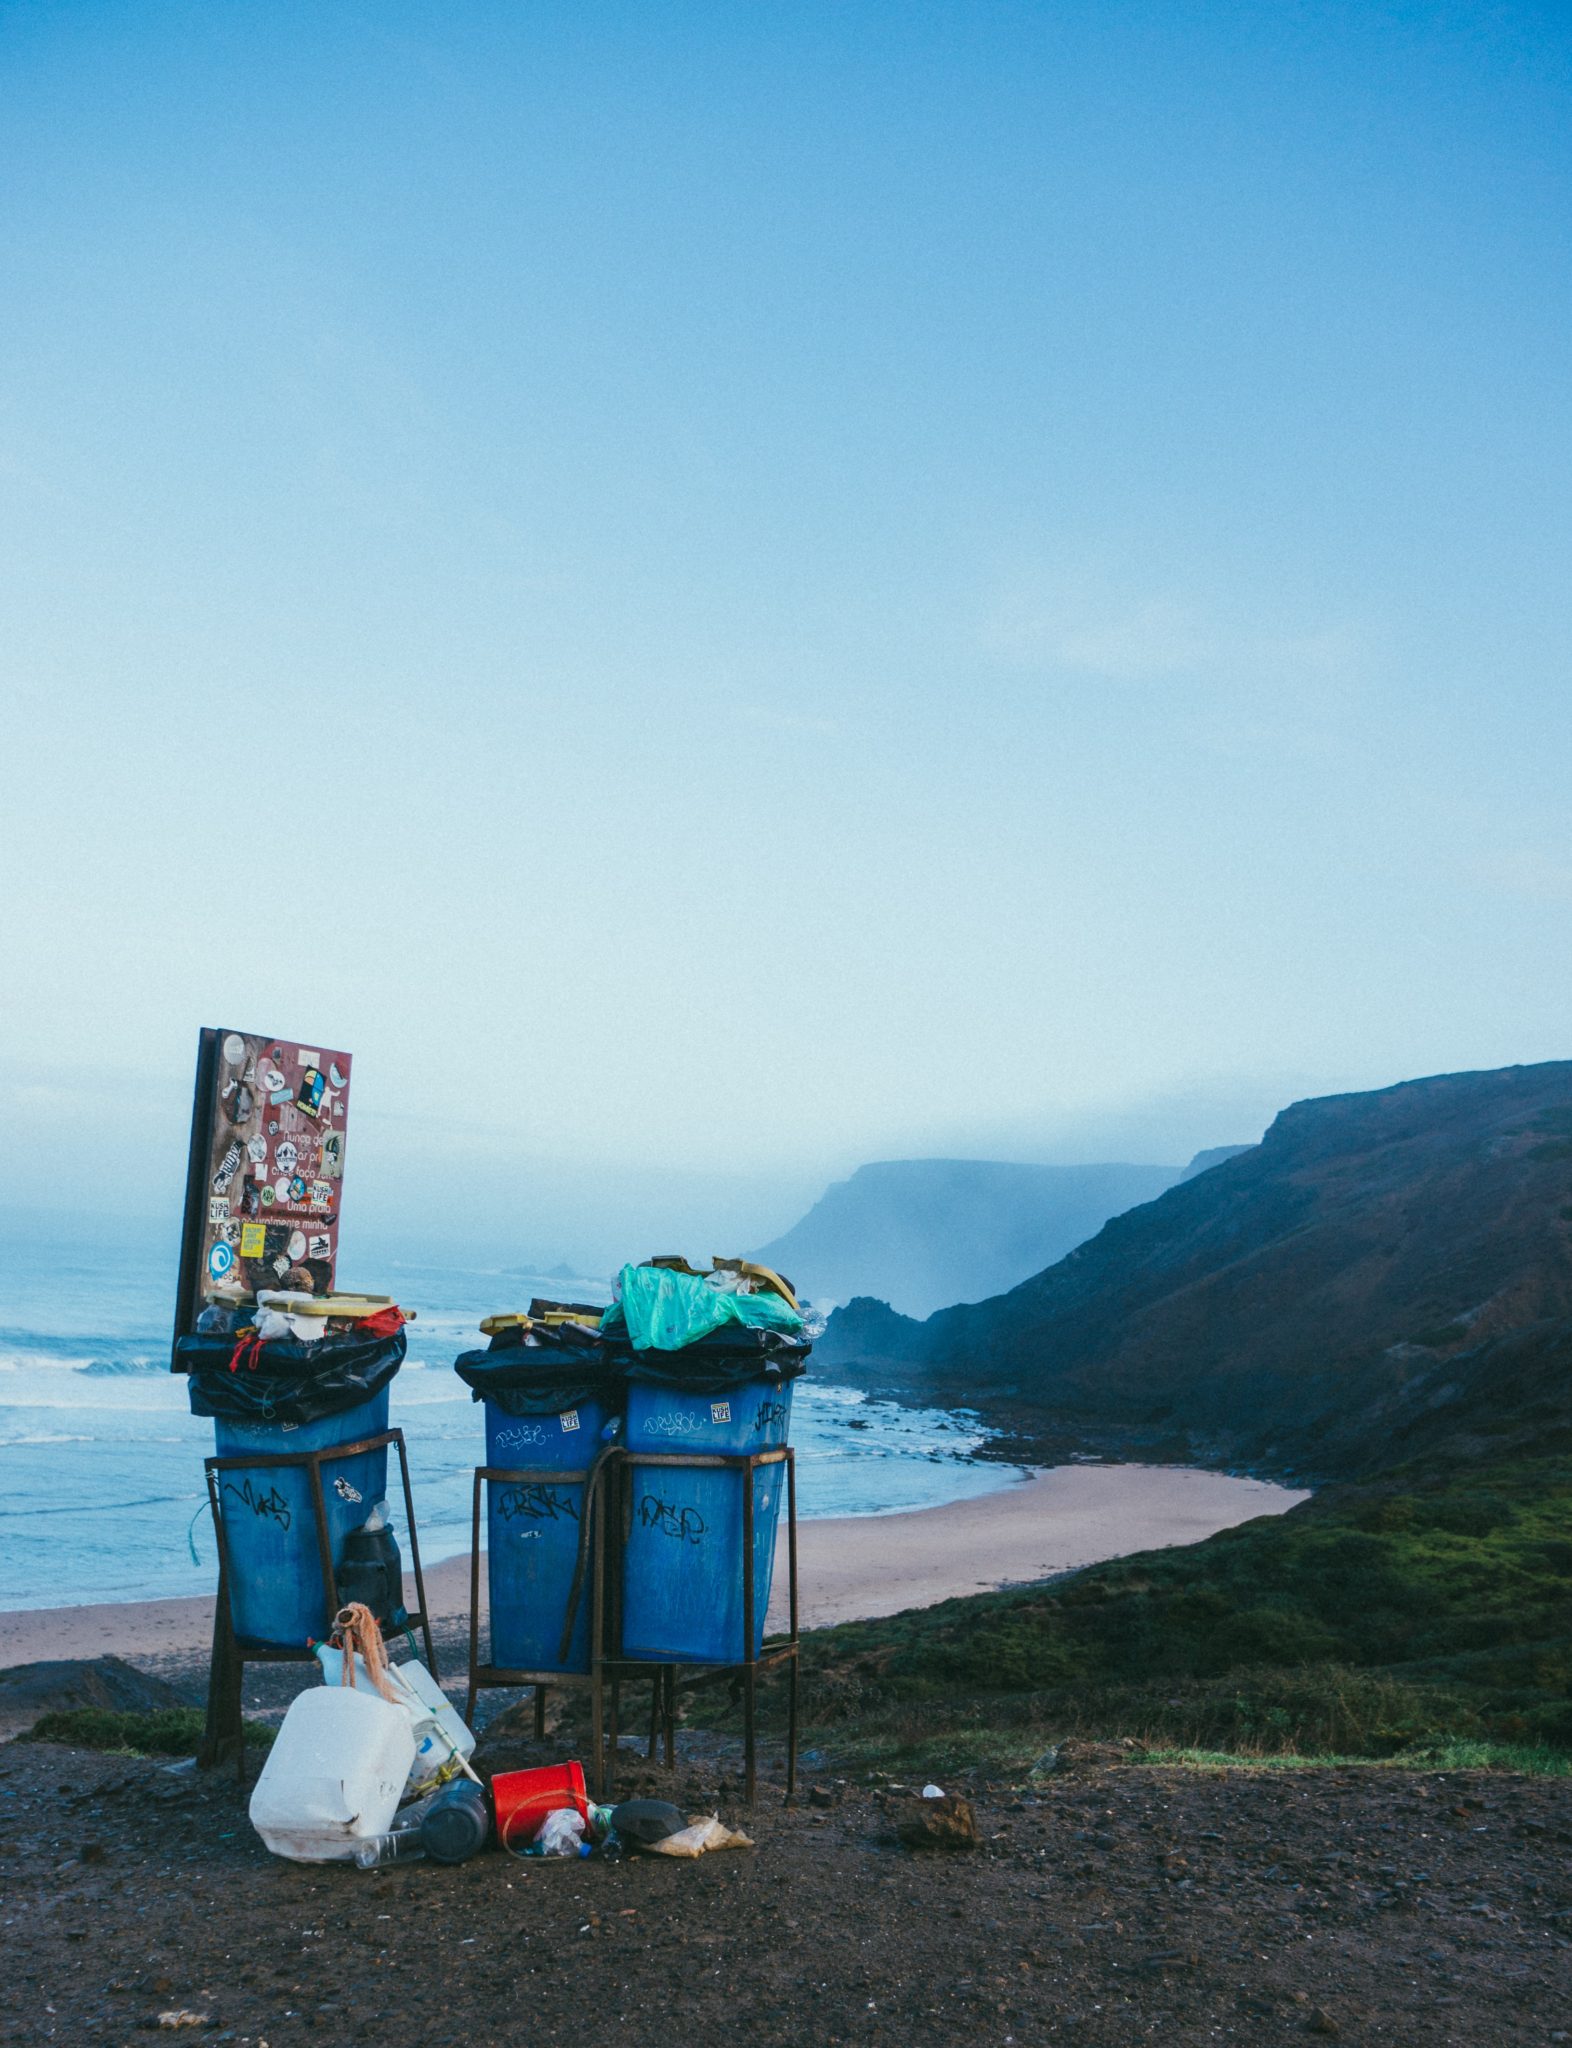 Beach cleanup, collect trash from beach